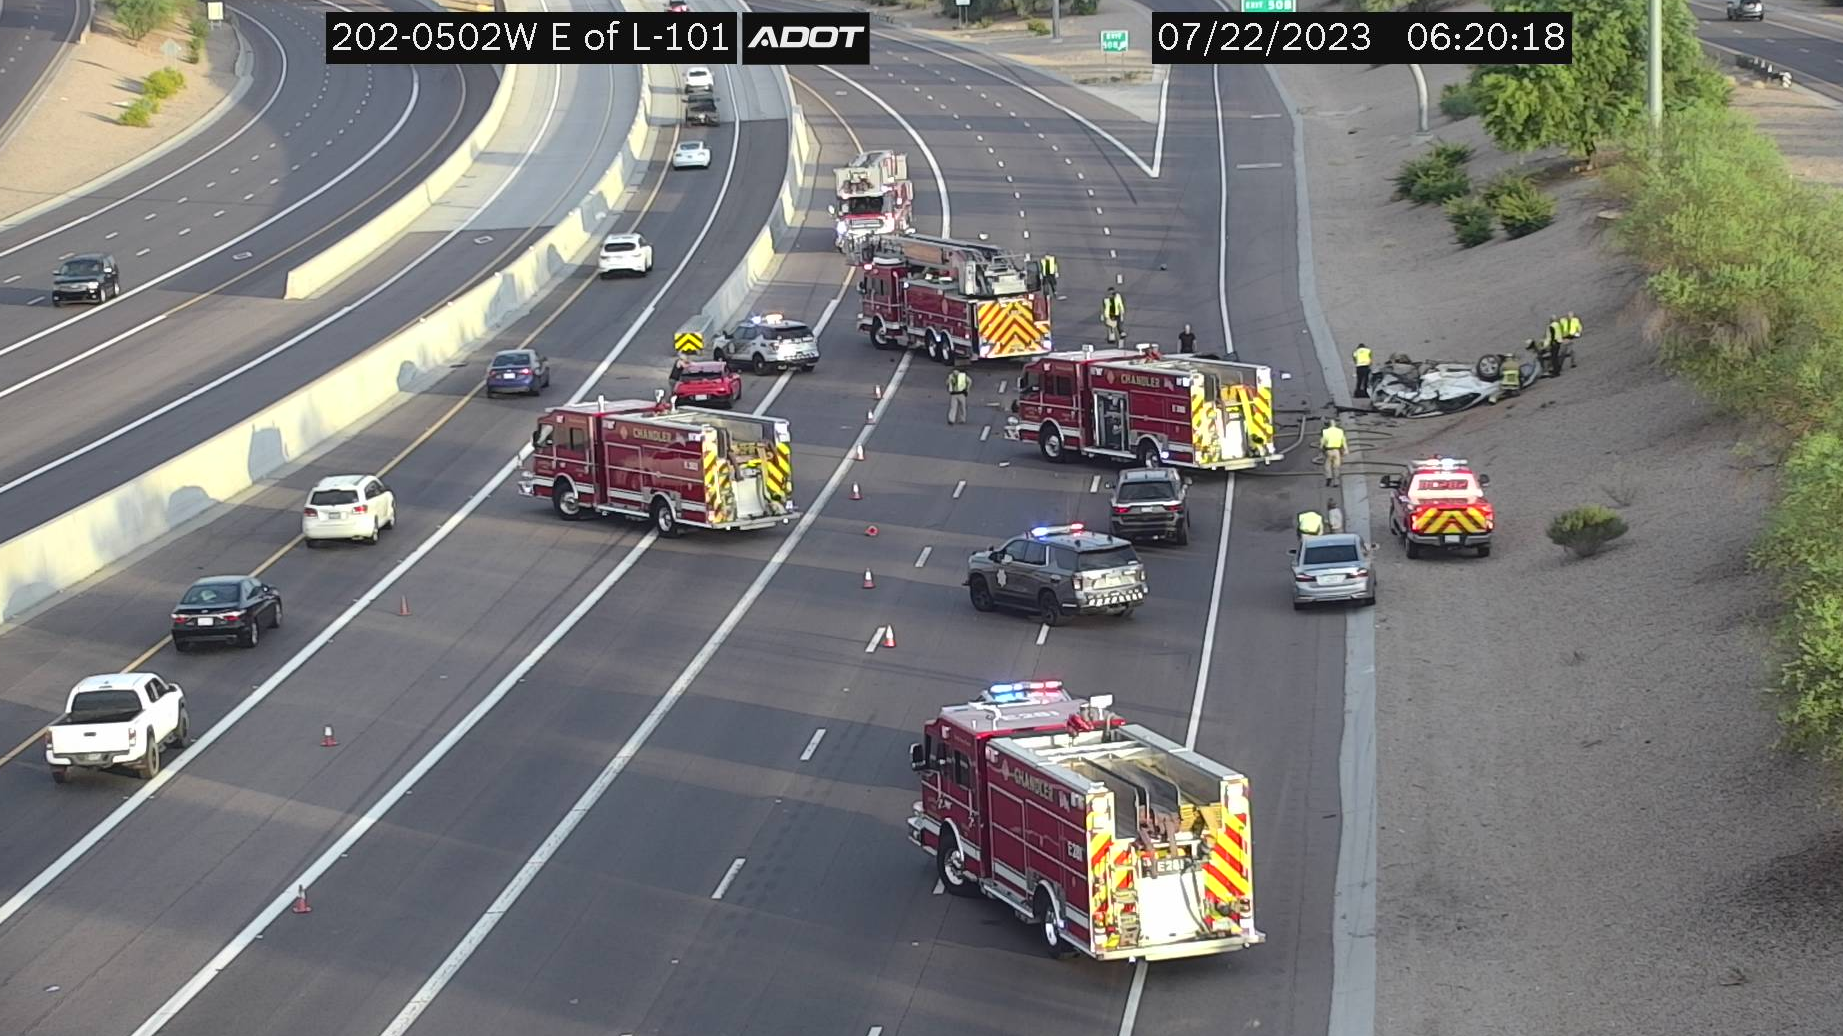 202 Accident Today, Motorcycle Accident Reported in Arizona 202 Freeway - Maricopa County, AZ